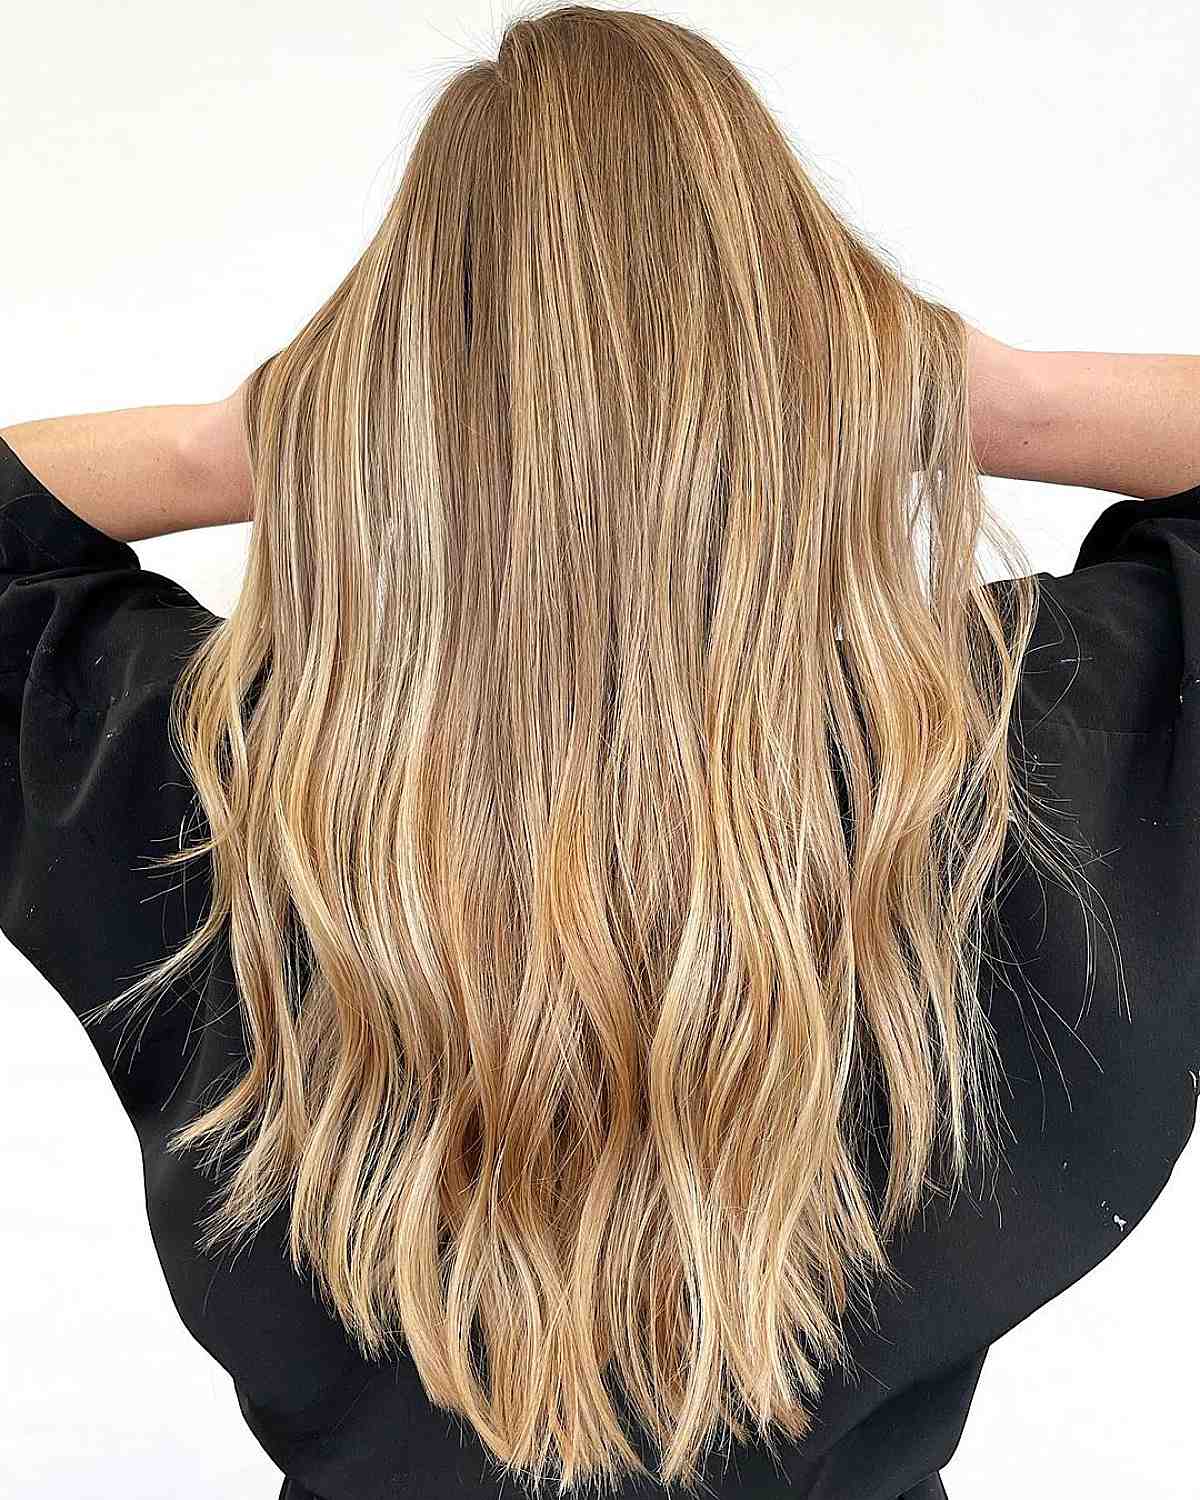 bright and dimensional sandy blonde with long hair